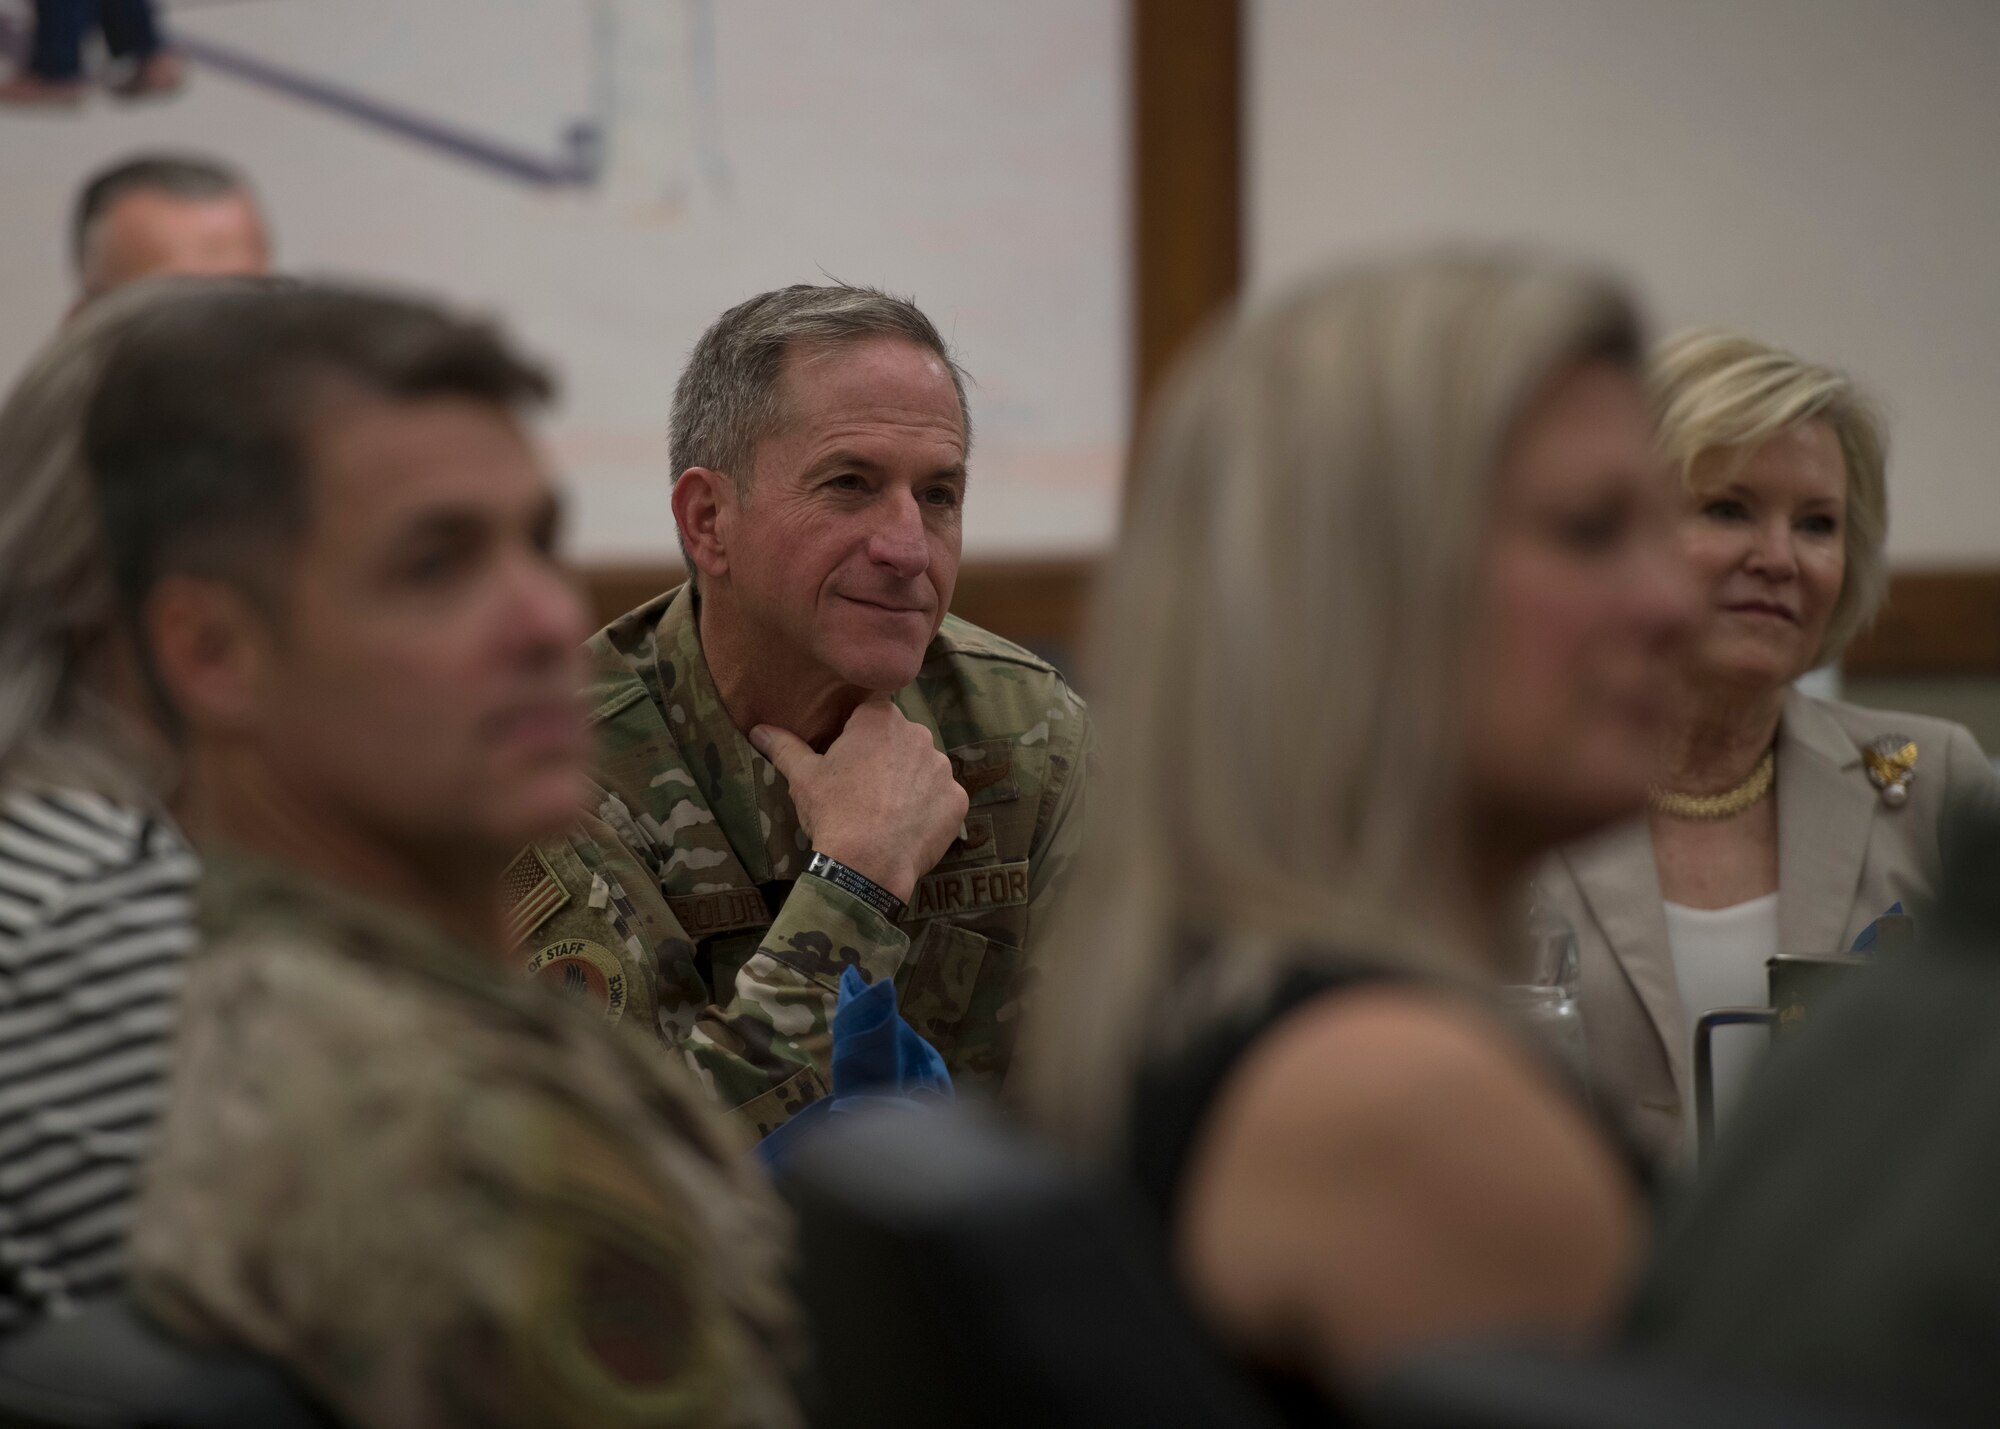 Air Force Chief of Staff Gen. David L. Goldfein and his wife Dawn receive a 56th Fighter Wing mission brief at Luke Air Force Base, Ariz., Nov. 8, 2019.